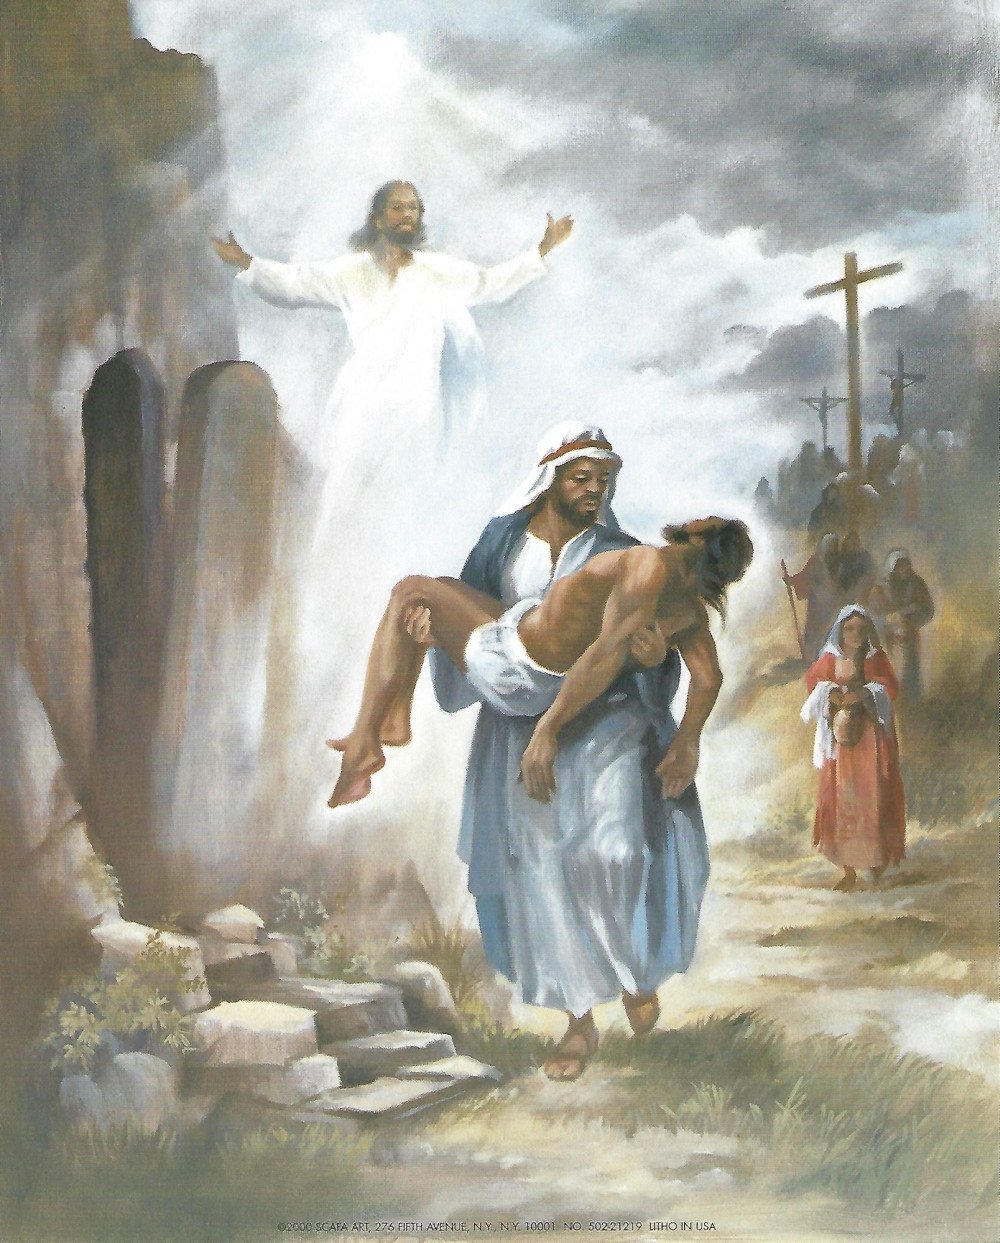 1 of 2: And He Rose: The Resurrection (Black Jesus) by Vincent Barzoni